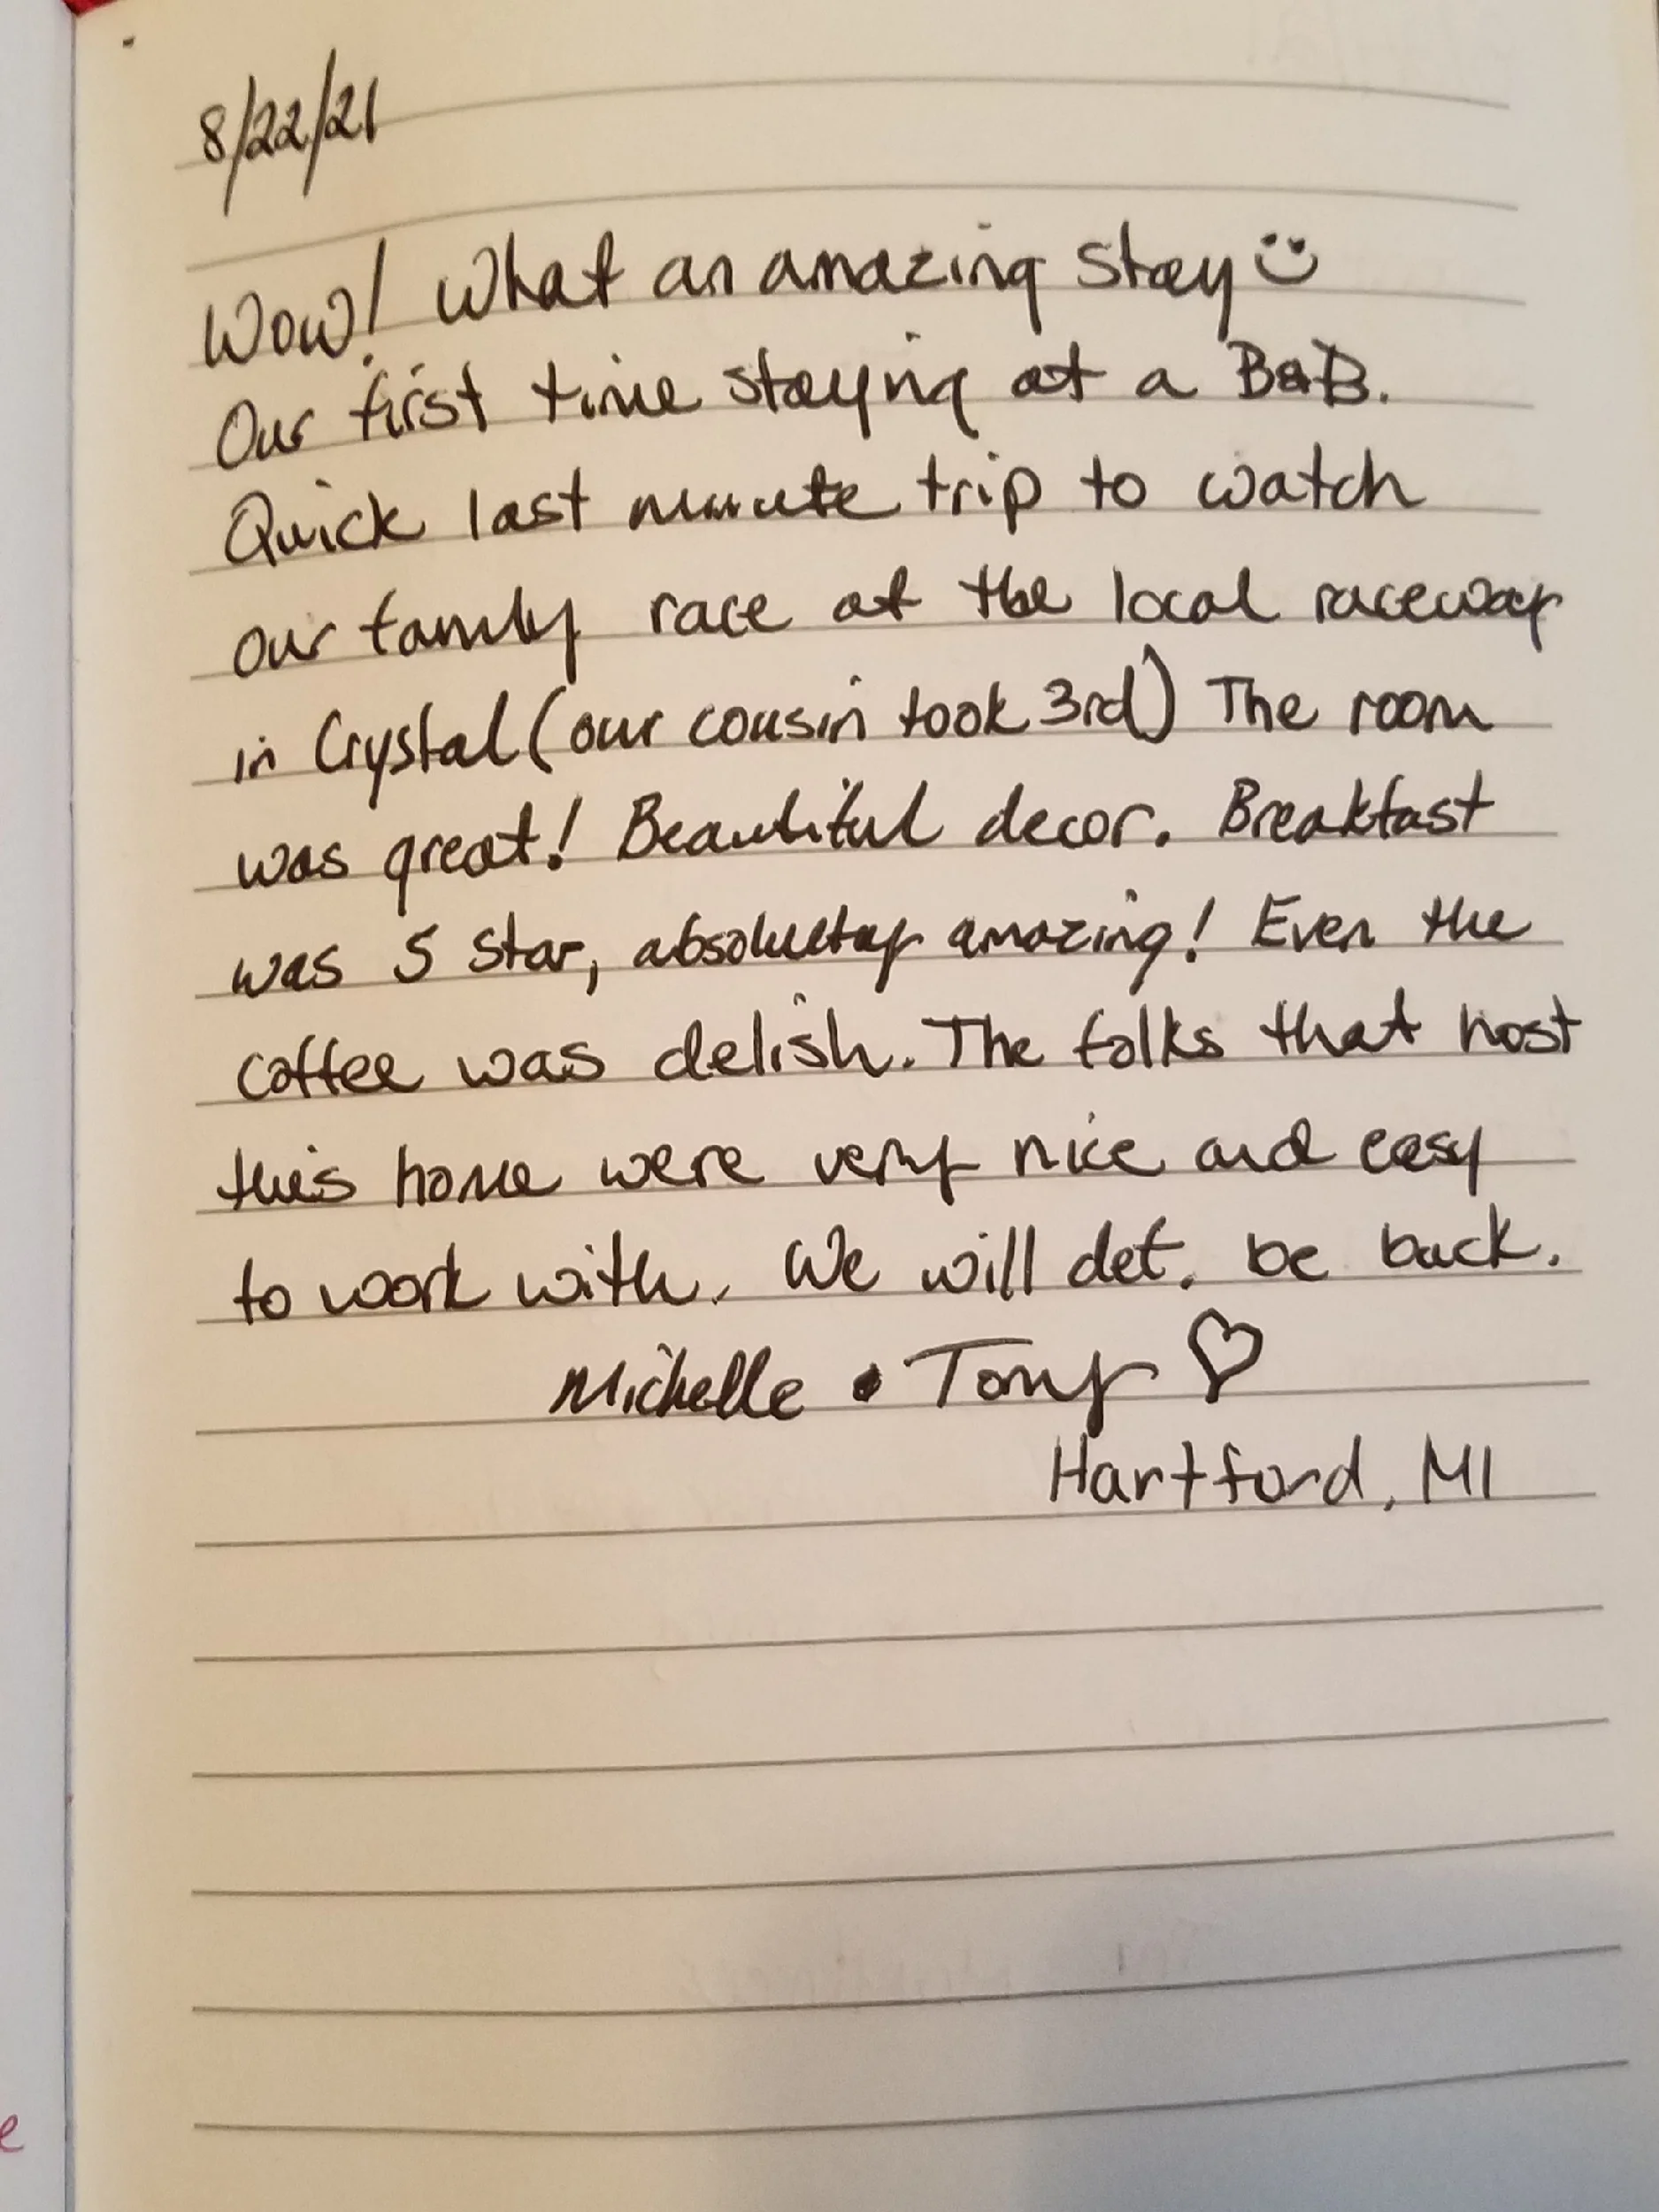 Guest Book Entry